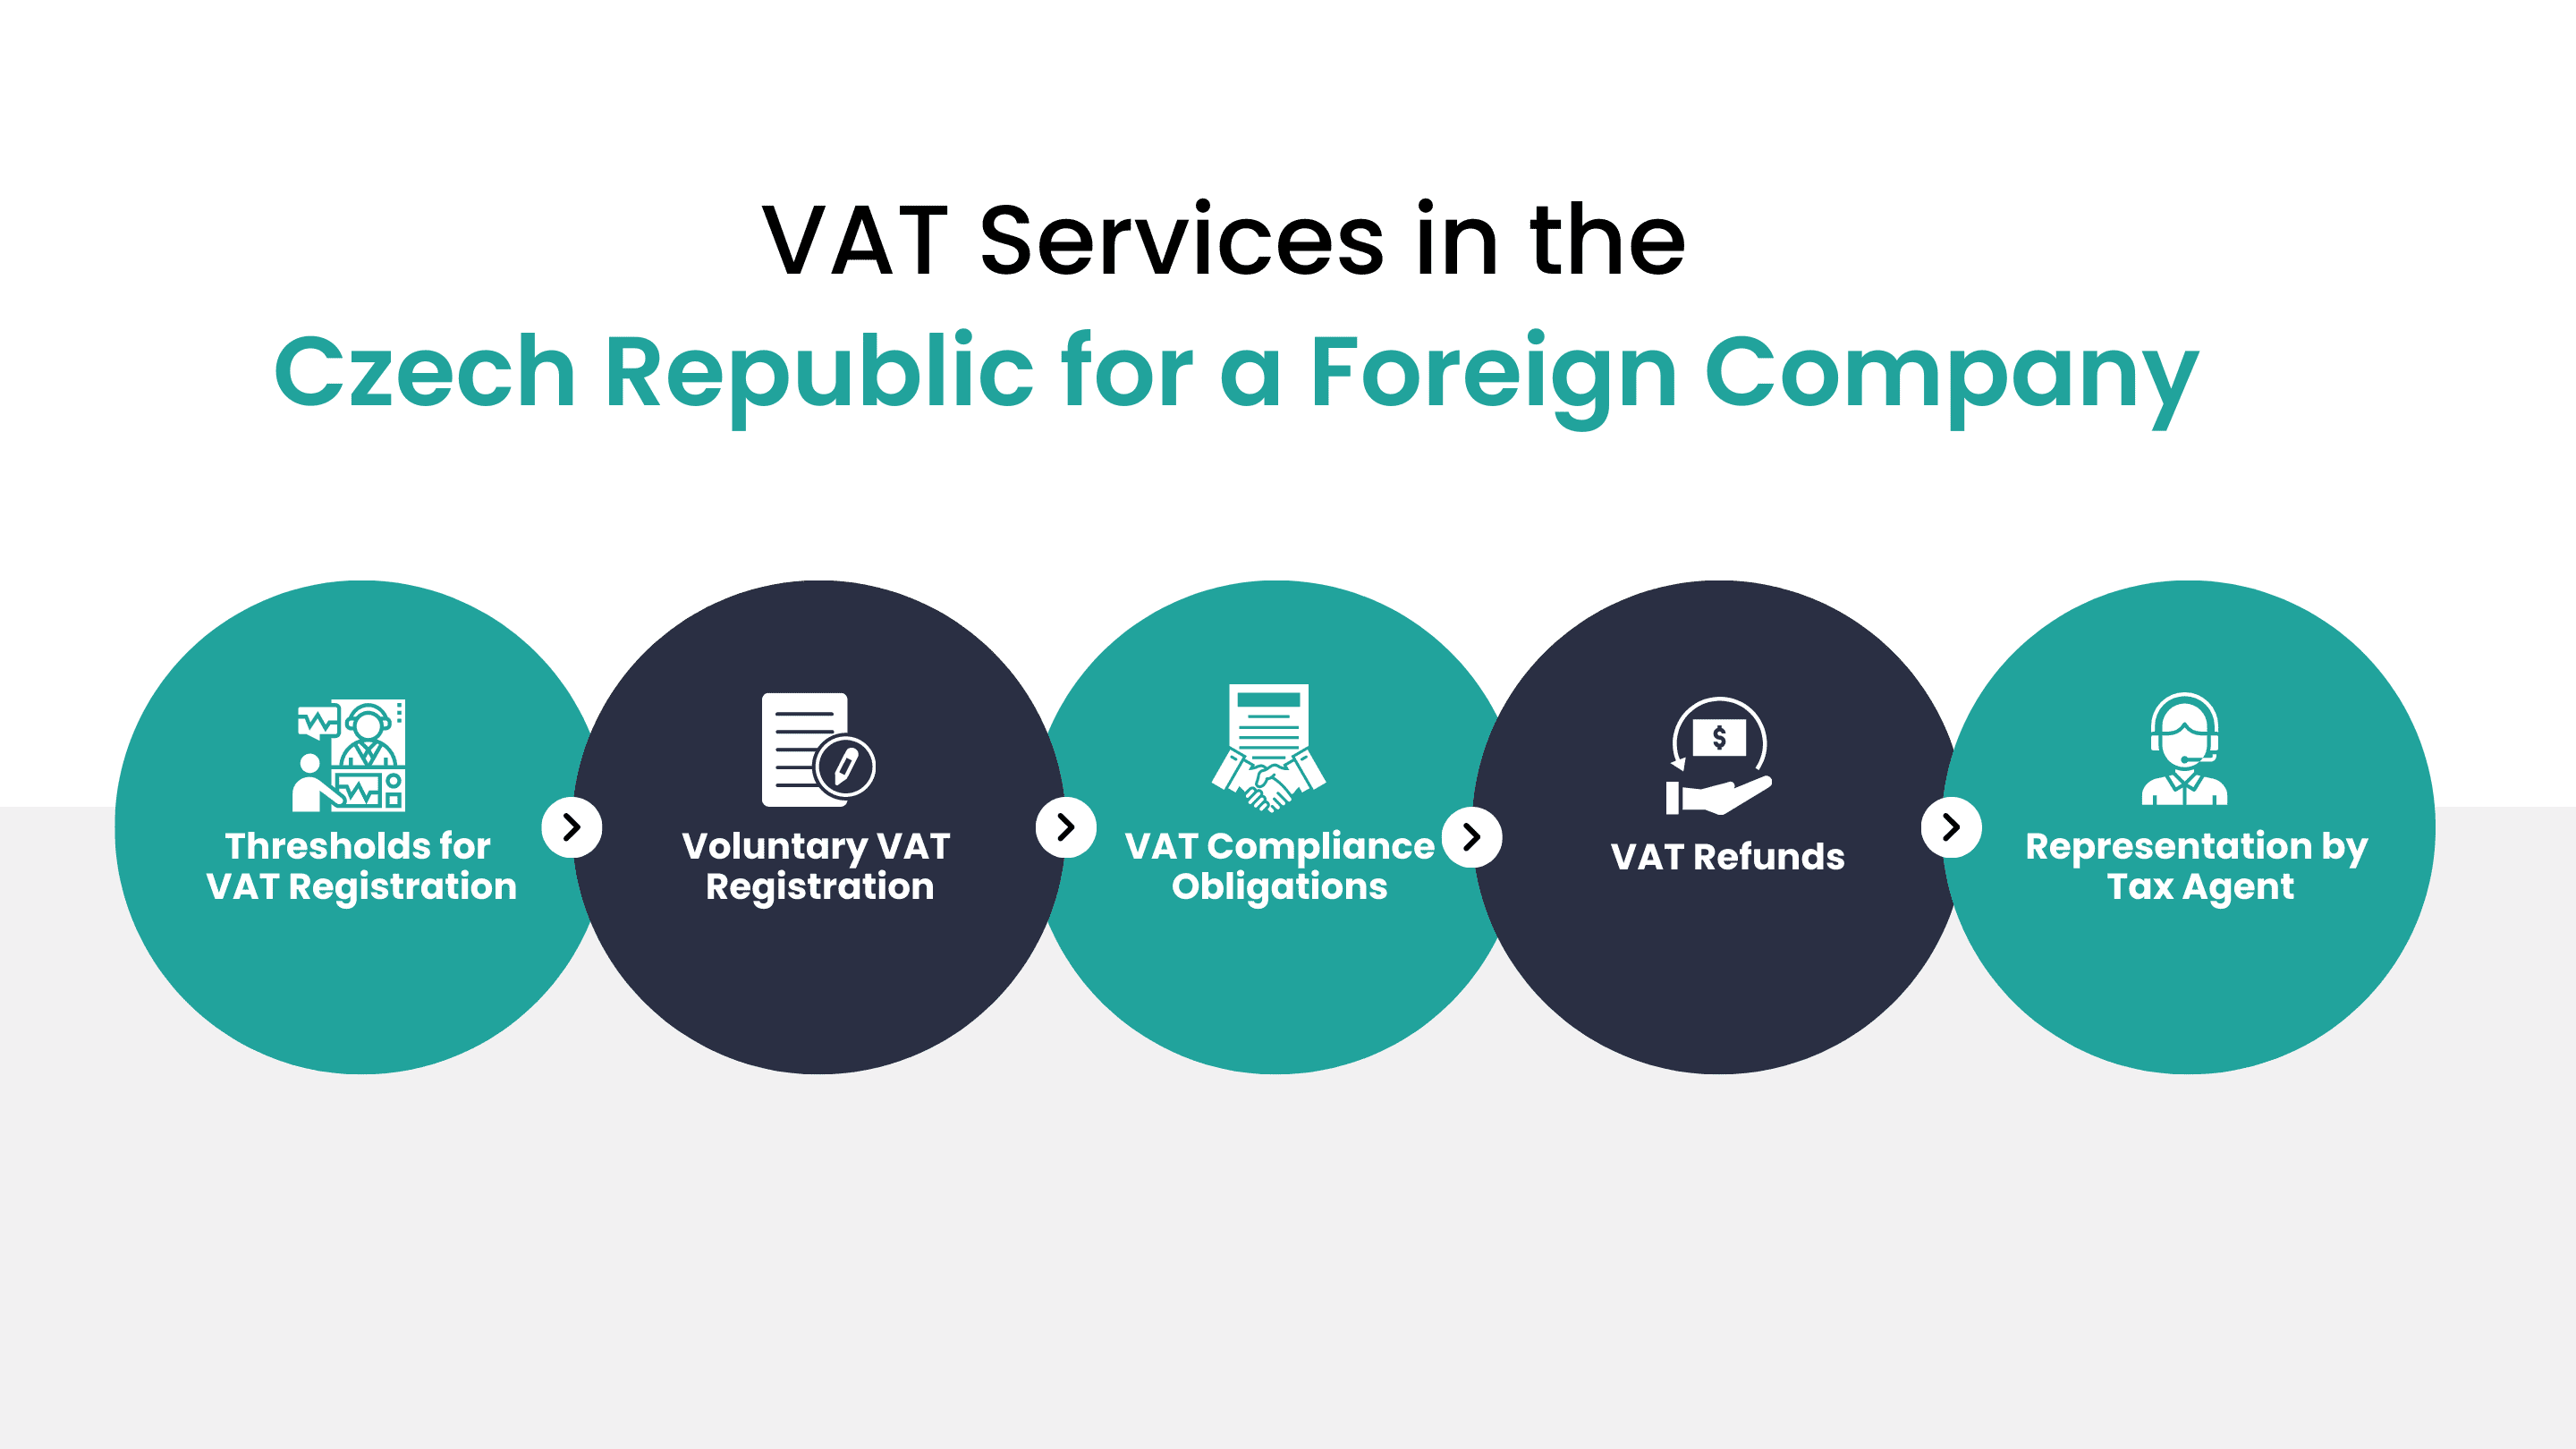 vat services in the czech republic for a foreign company